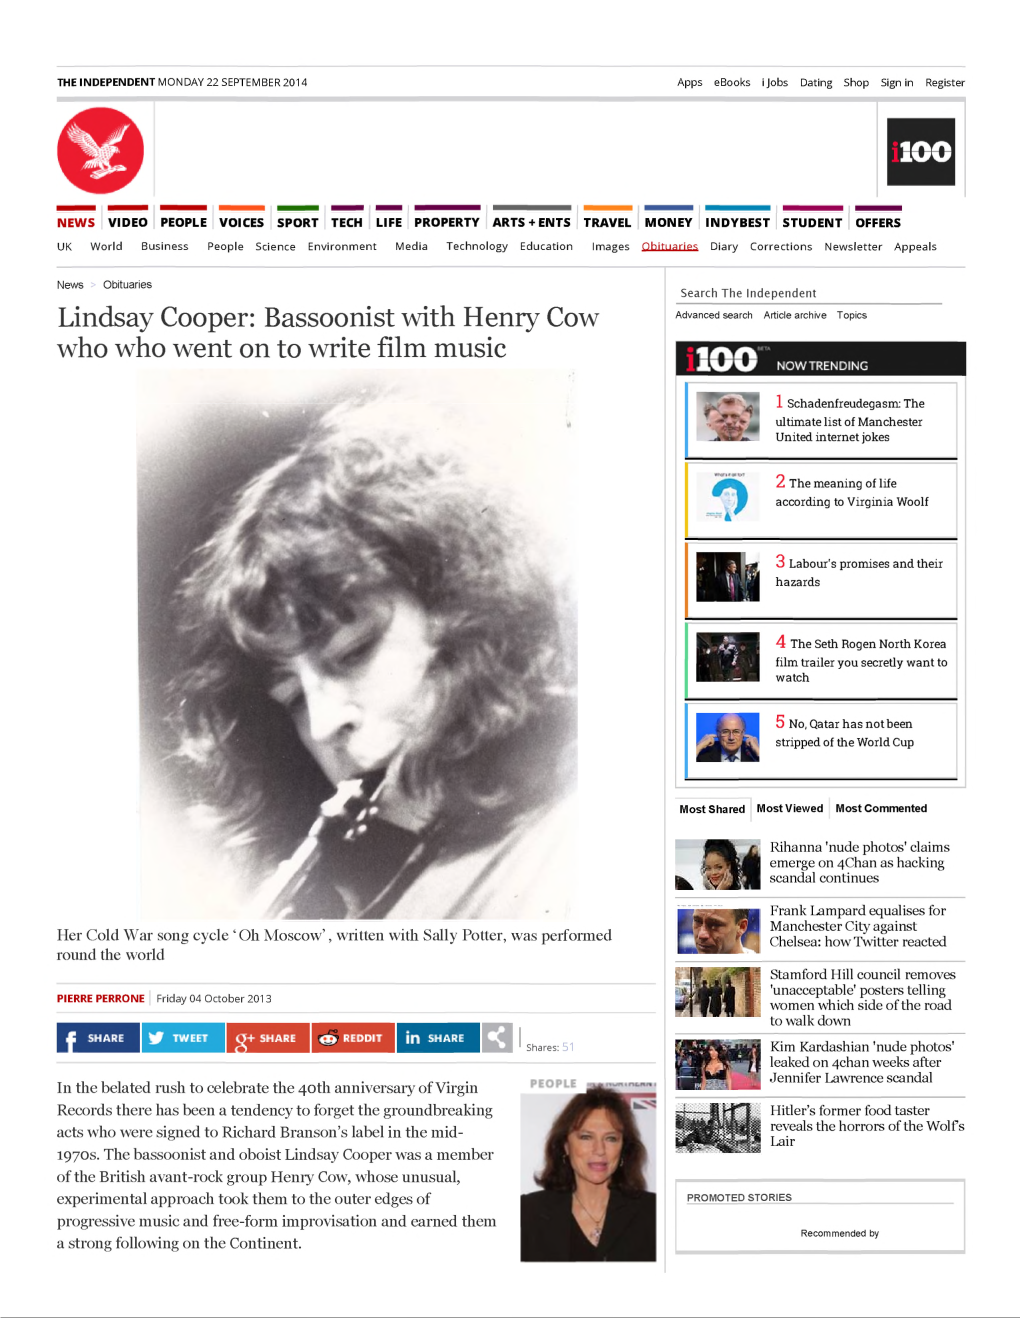 Lindsay Cooper: Bassoonist with Henry Cow Advanced Search Article Archive Topics Who Who Went on to Write Film Music 100 NOW TRENDING